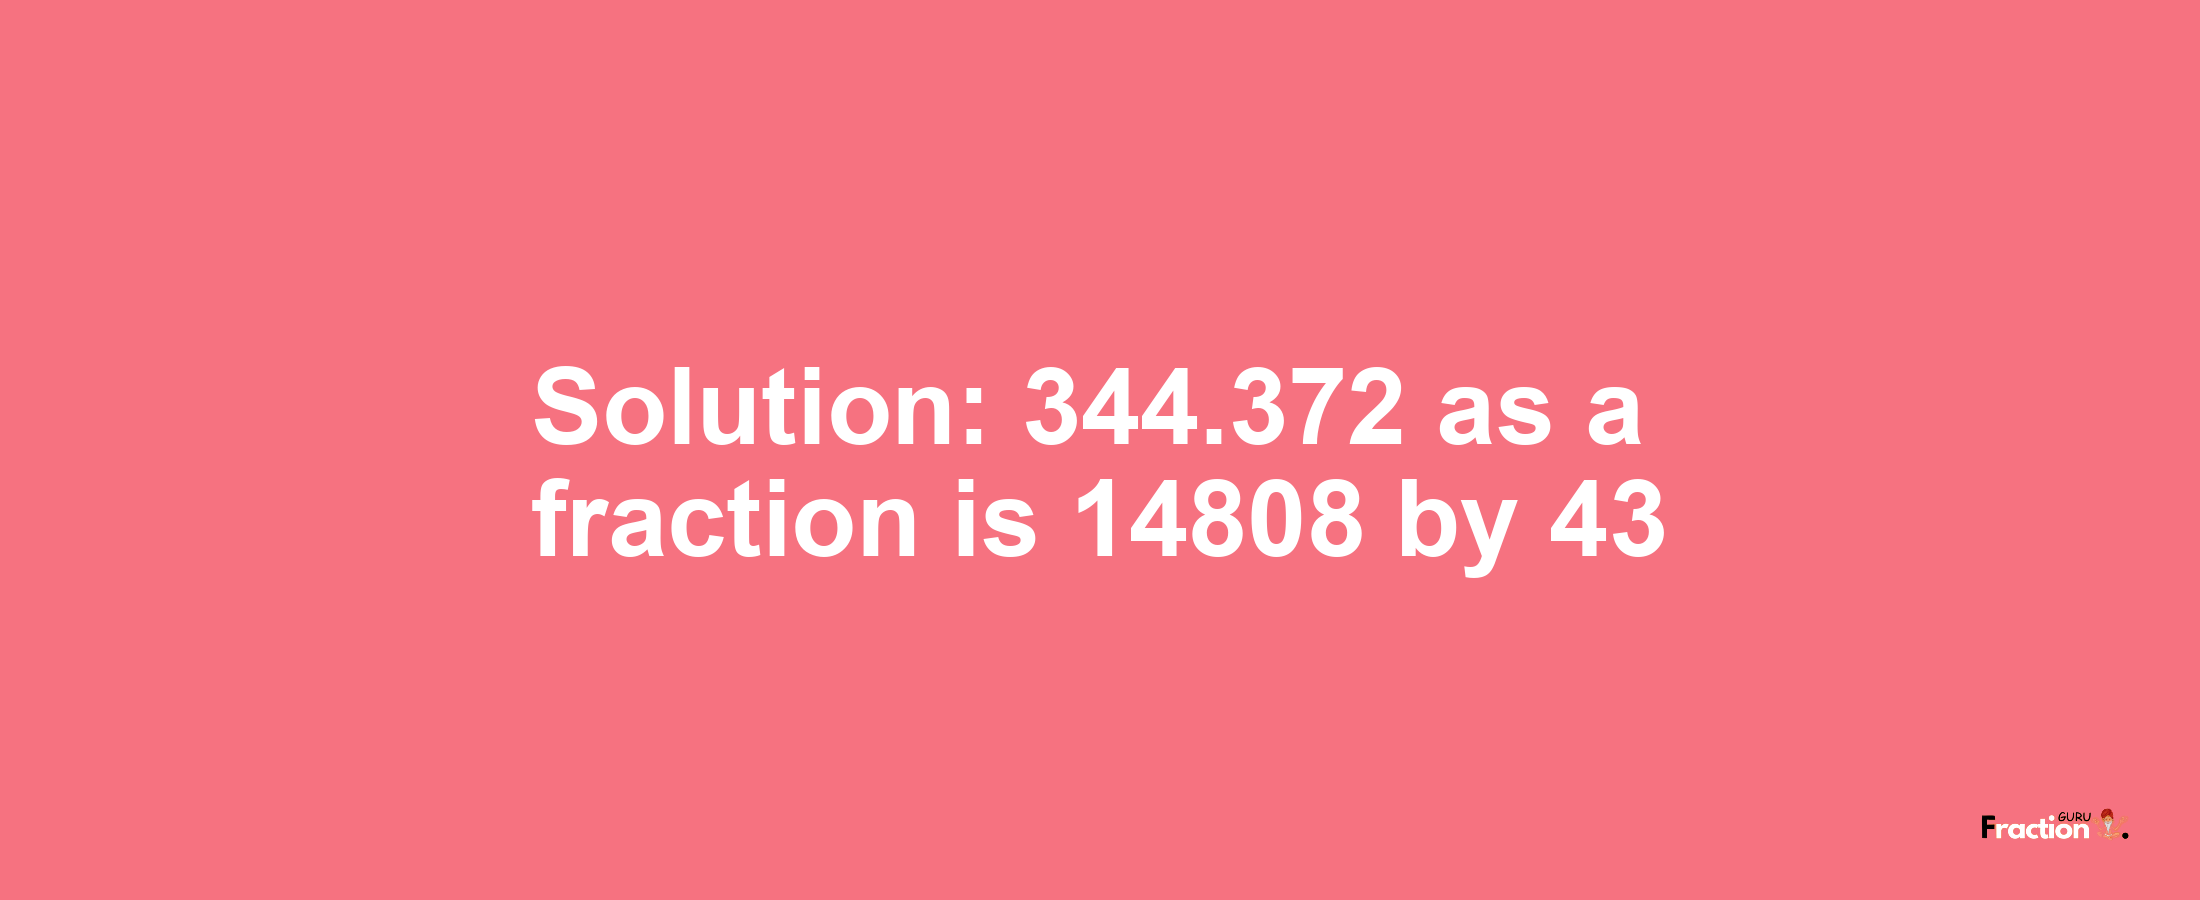 Solution:344.372 as a fraction is 14808/43